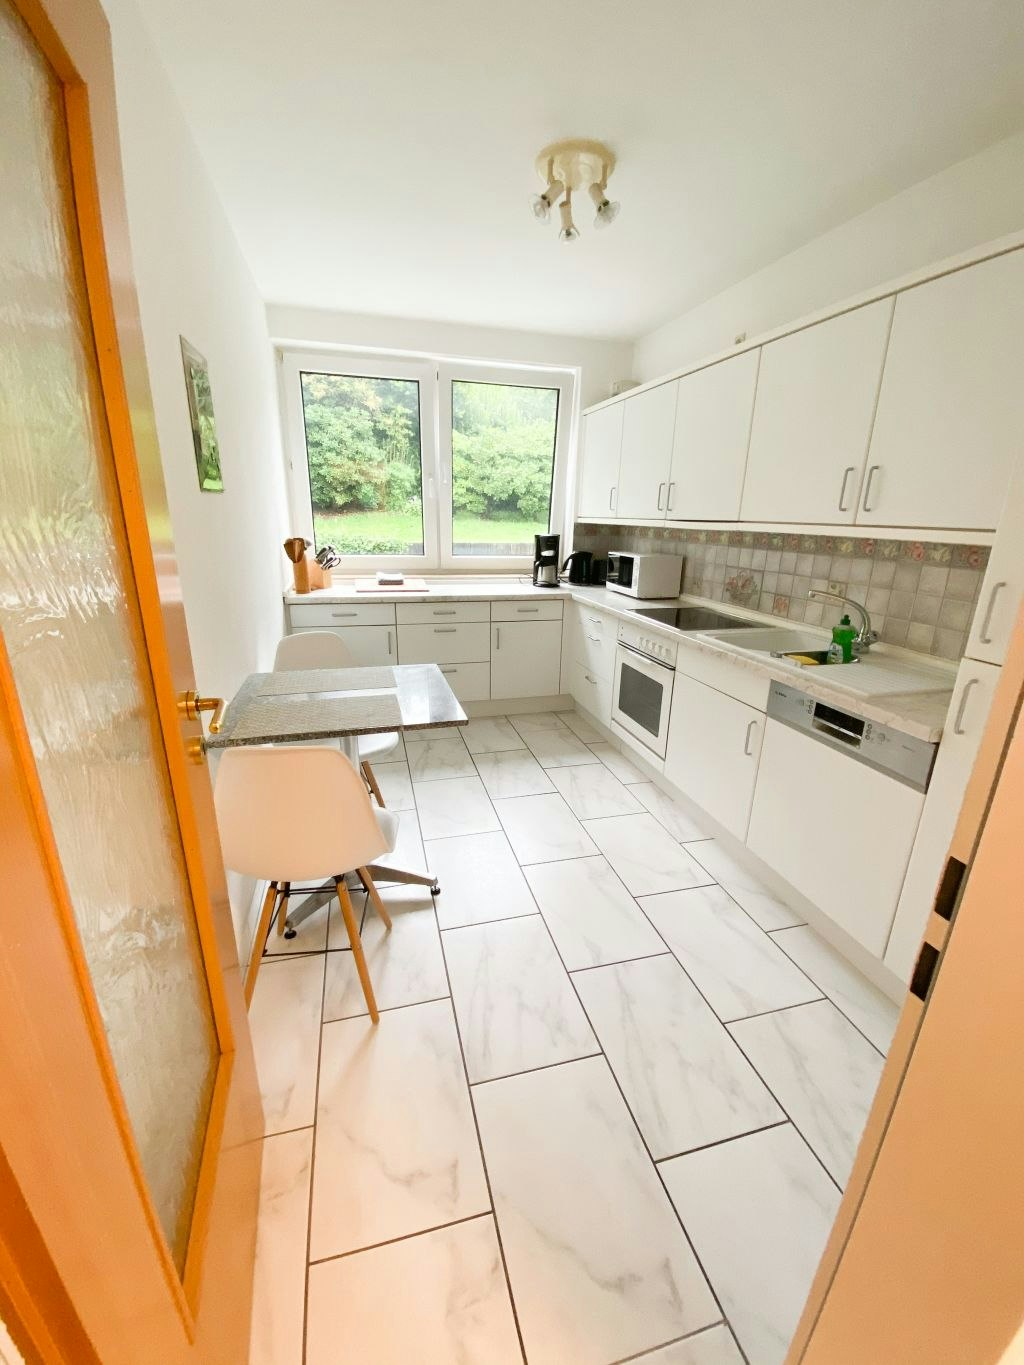 close to the center of Wuppertal/Remscheid - beautiful apartment in the countryside with a view of the garden - close to the city